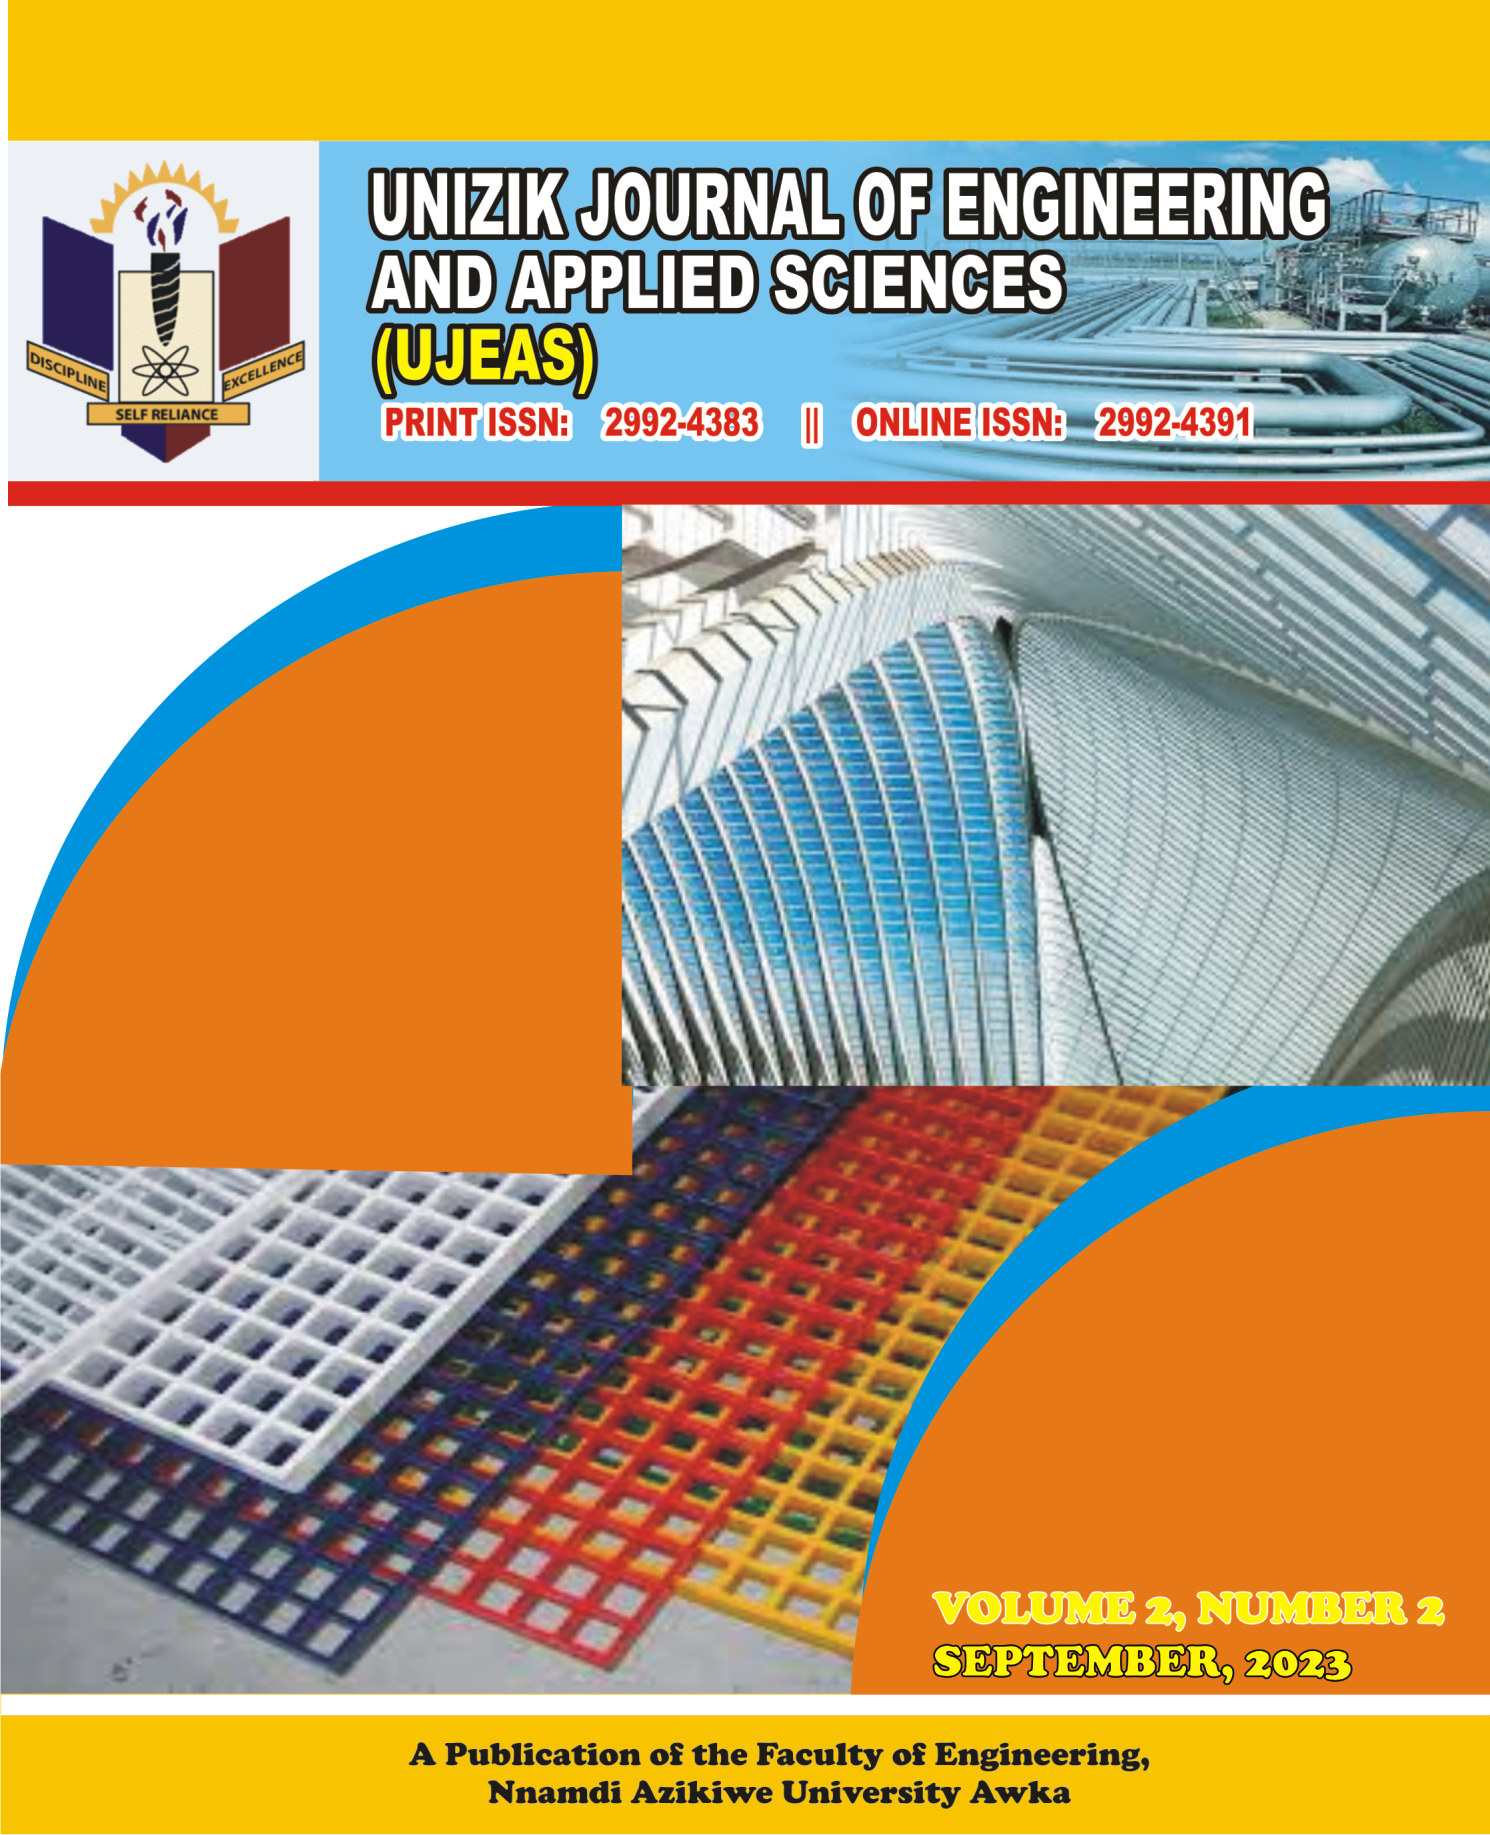 					View Vol. 2 No. 2 (2023): UNIZIK Journal of Engineering and Applied Sciences
				